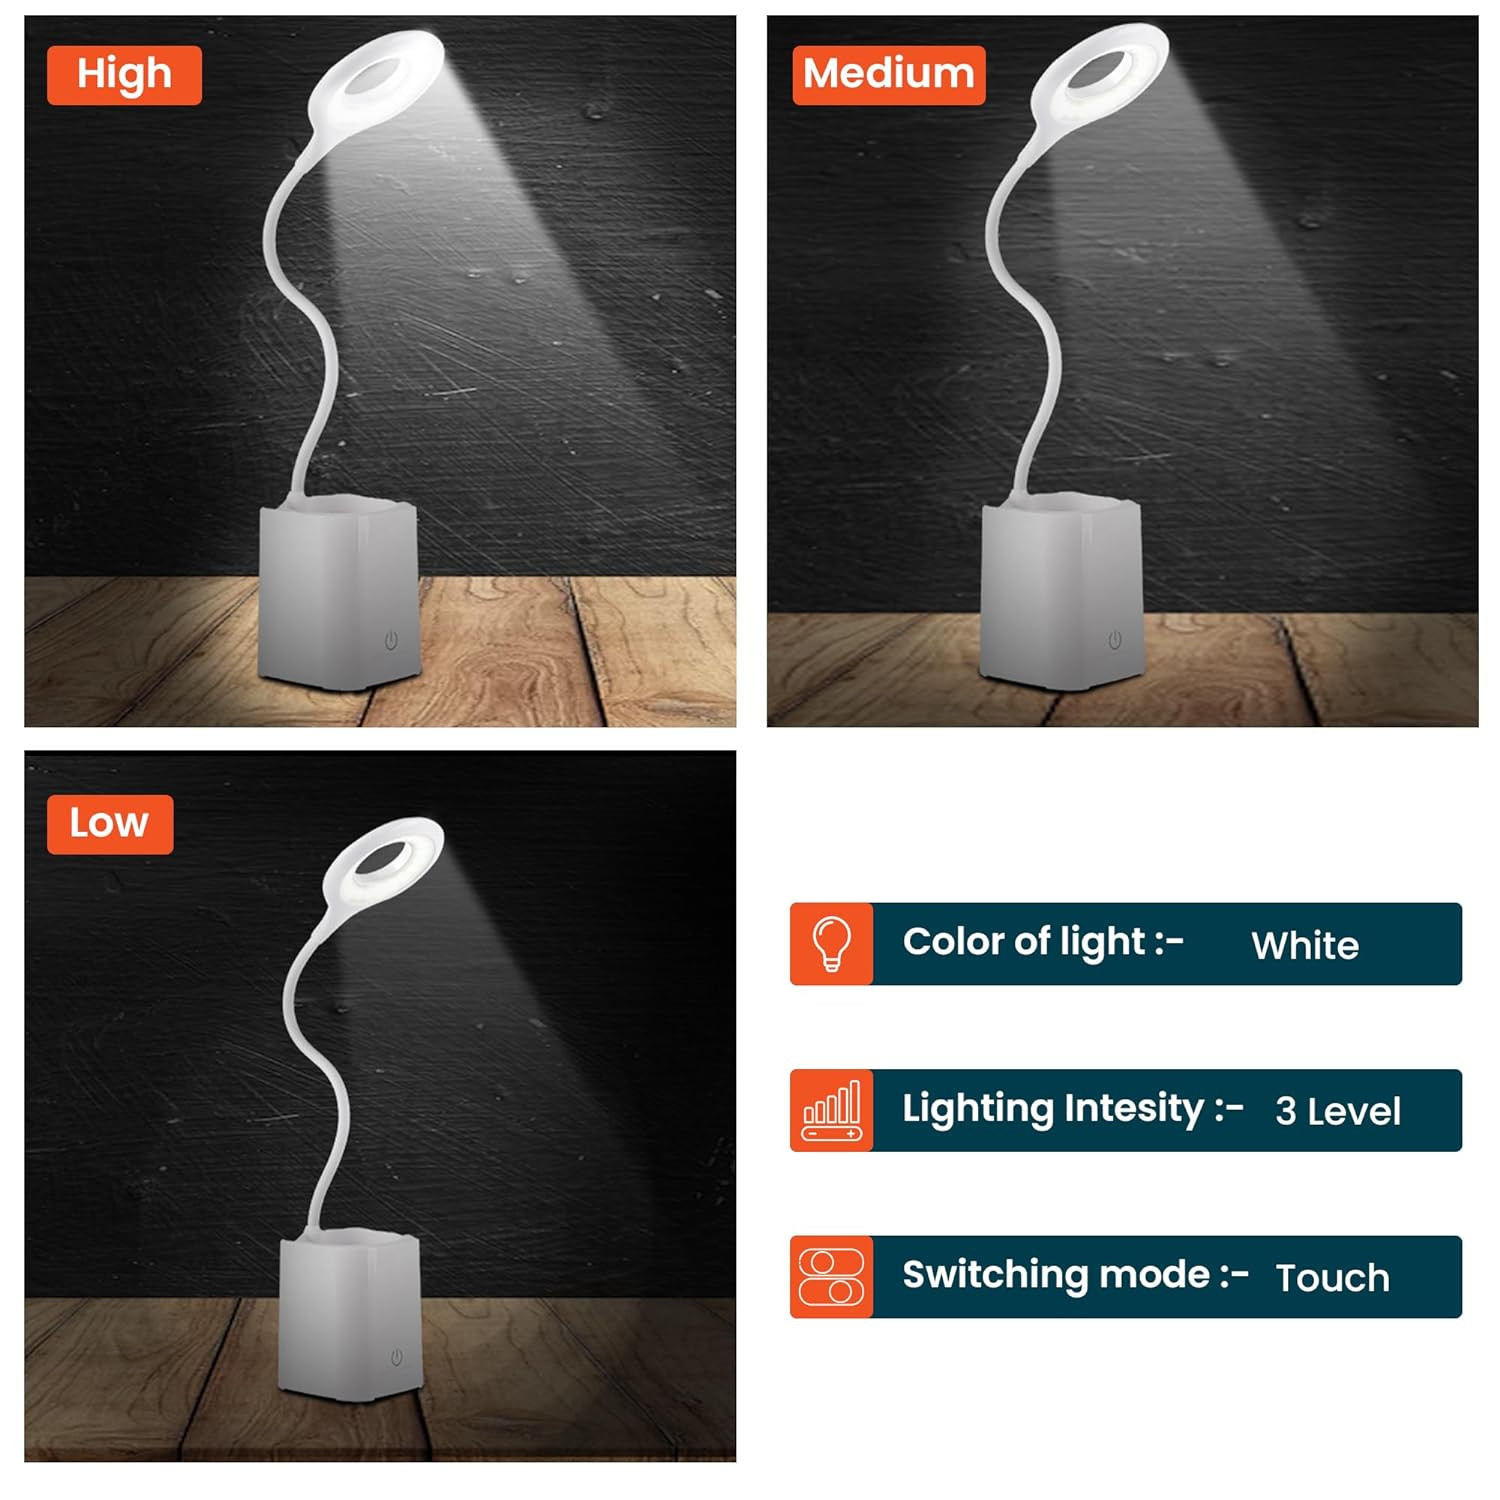 Kuber Industries Monochrome White Pencil Holder Lamp |Rechargeable Table Light with USB|Battery Capacity 1200mAh (White)